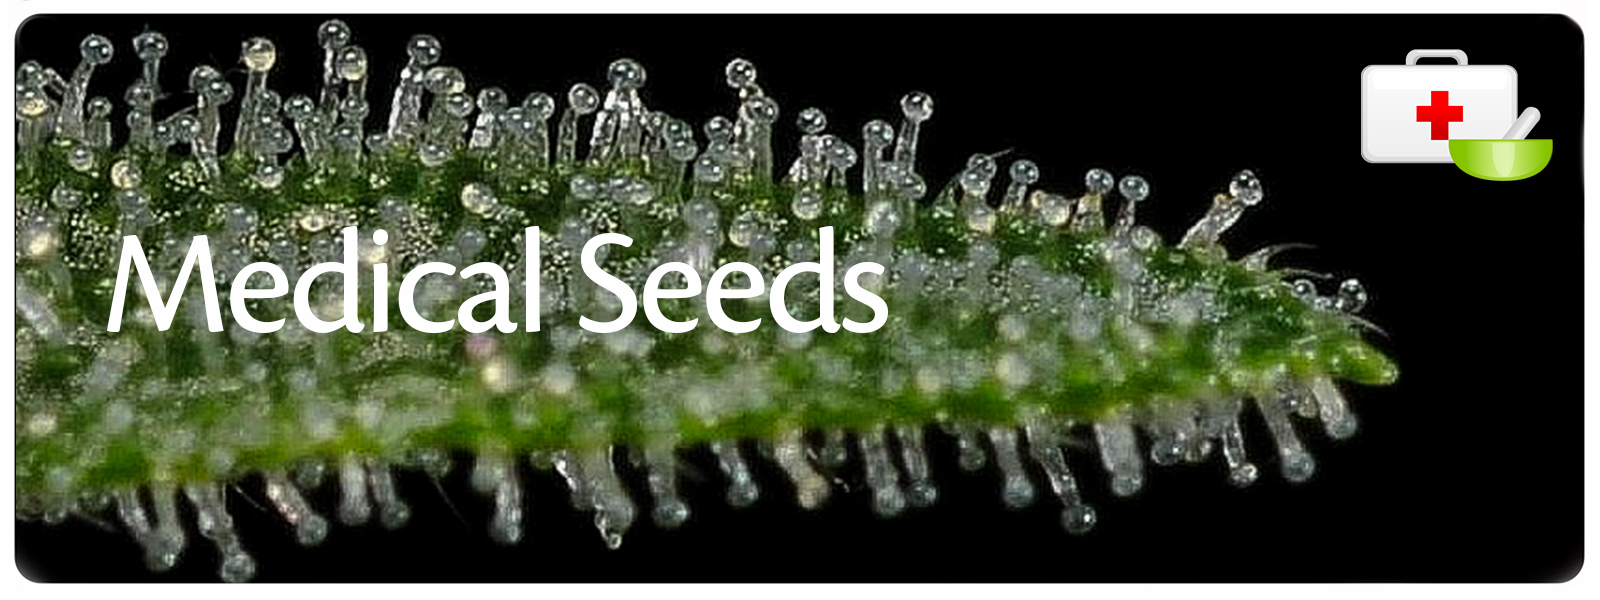 medical cannabis seeds produces strong and healthy plants for medicinal purposes